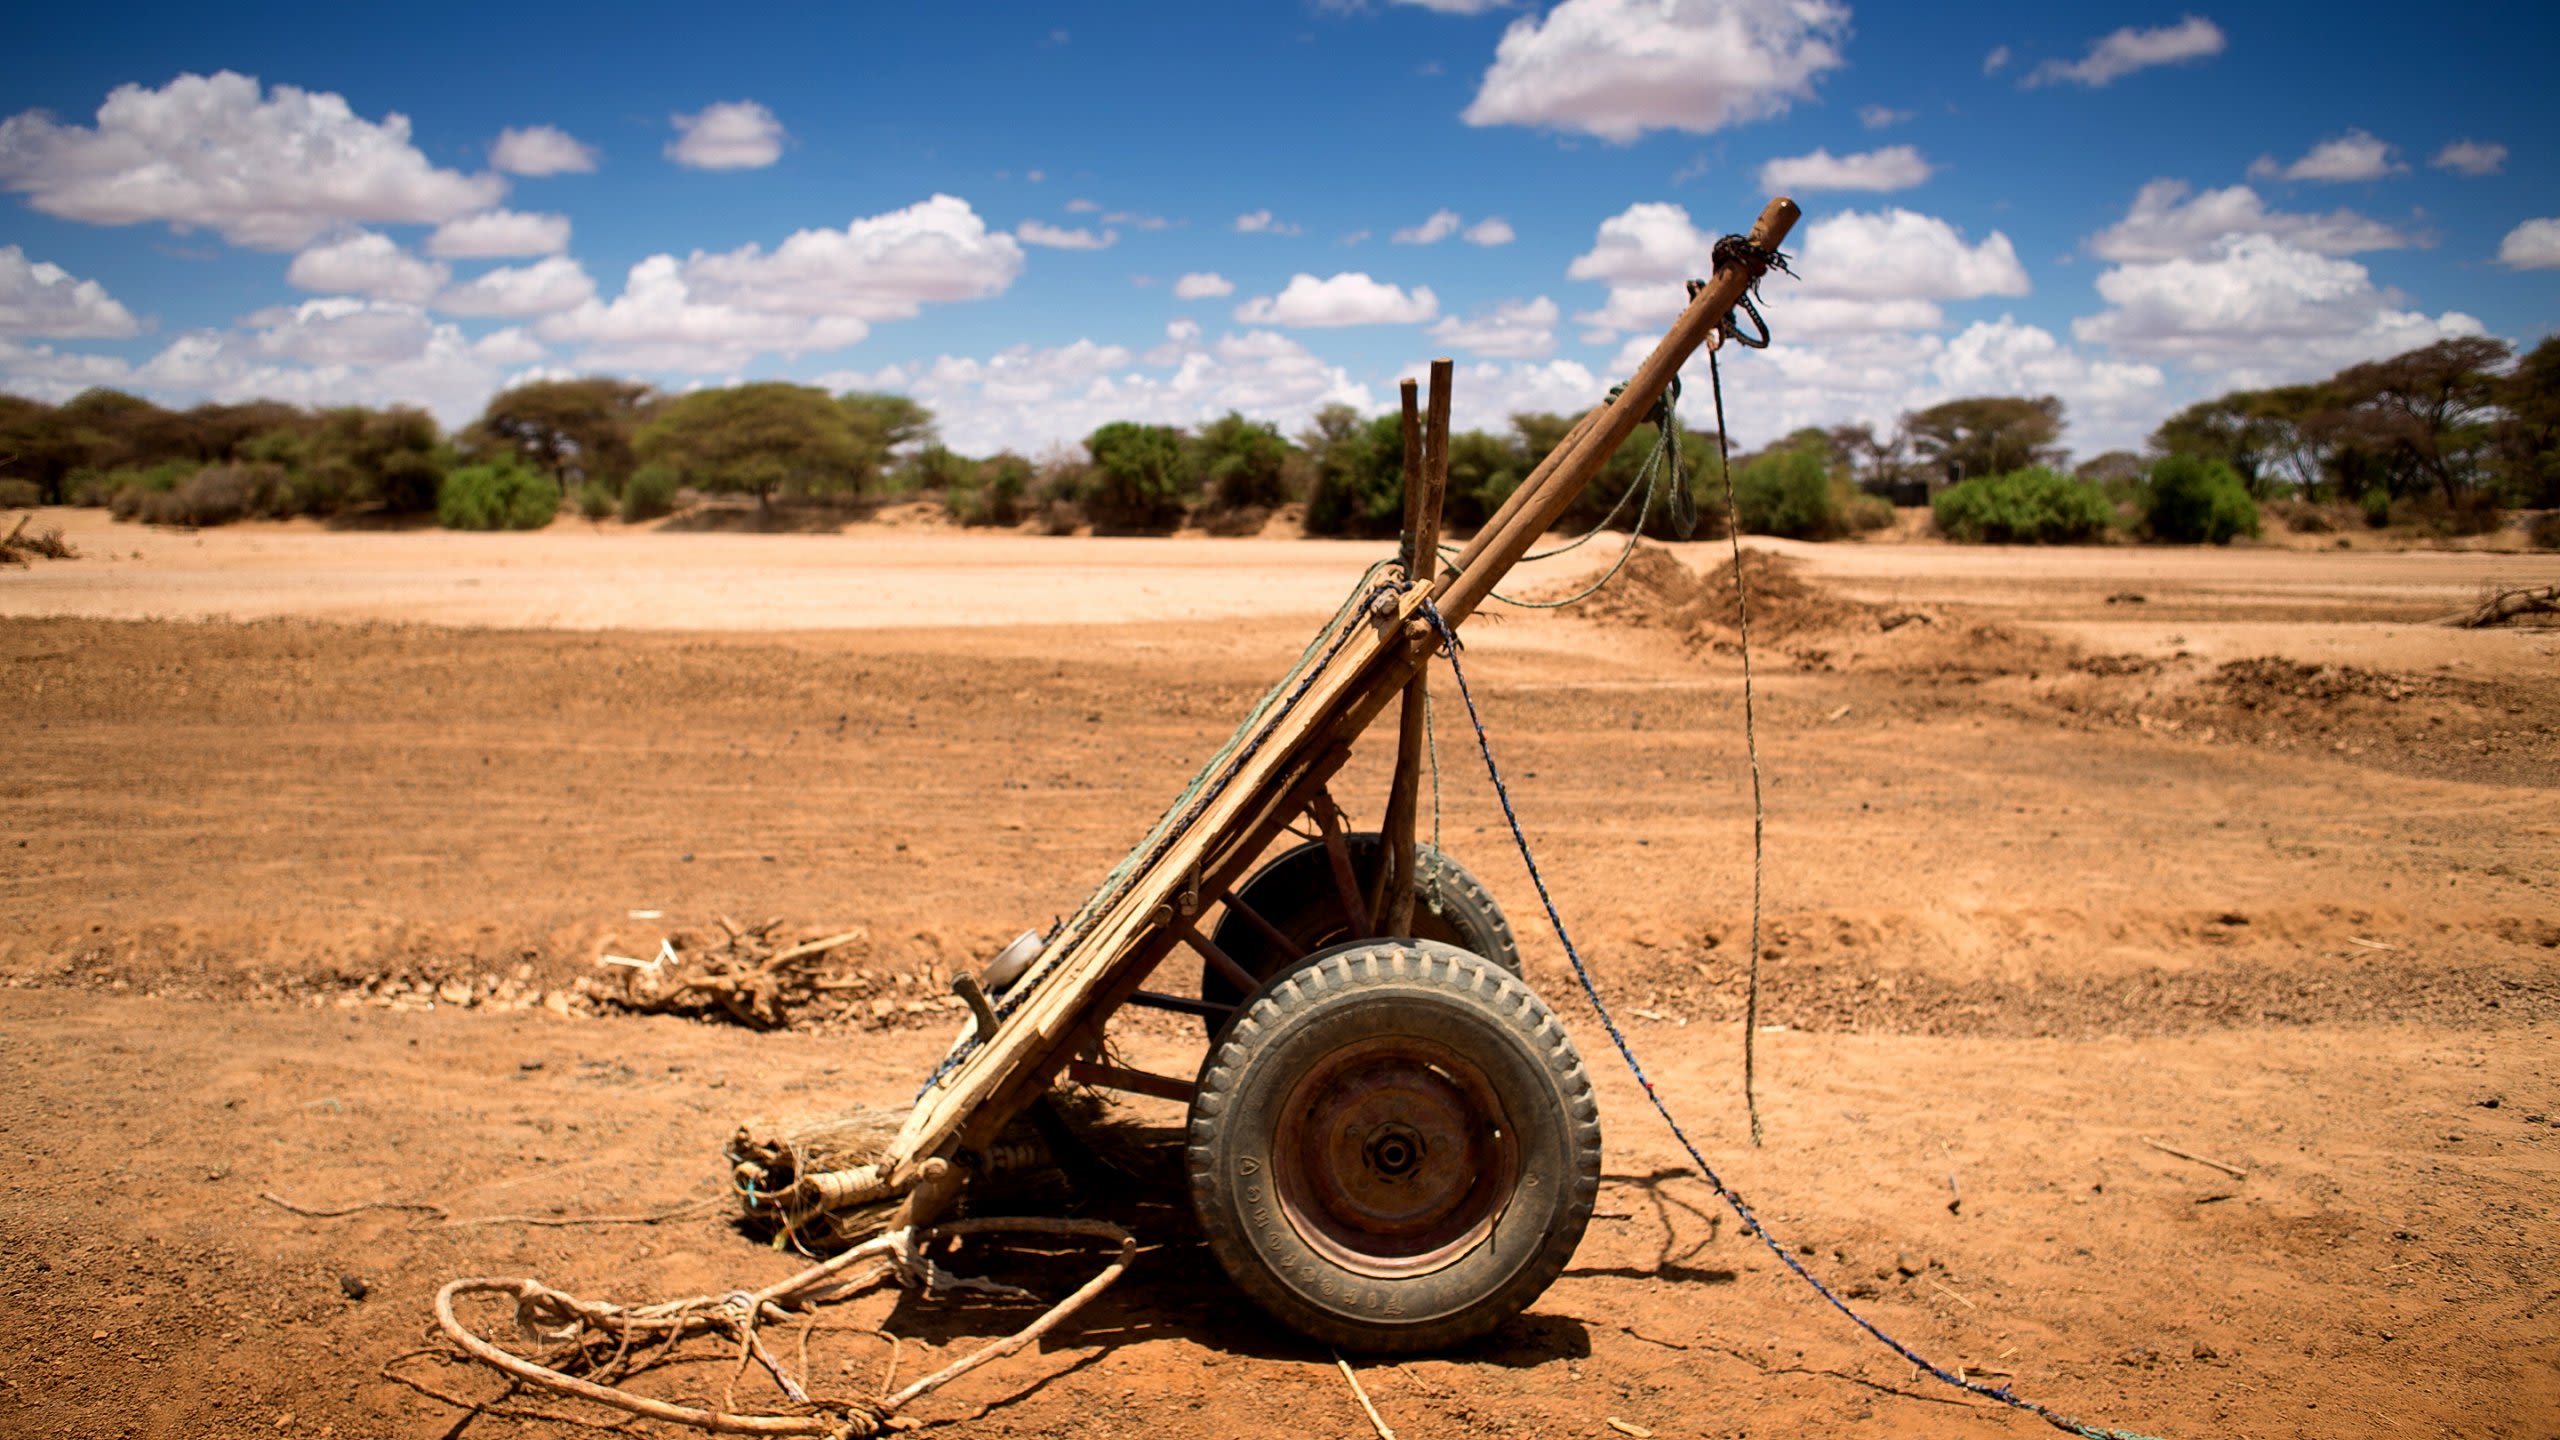 Drought in Kenya, Isiolo county, April 2017